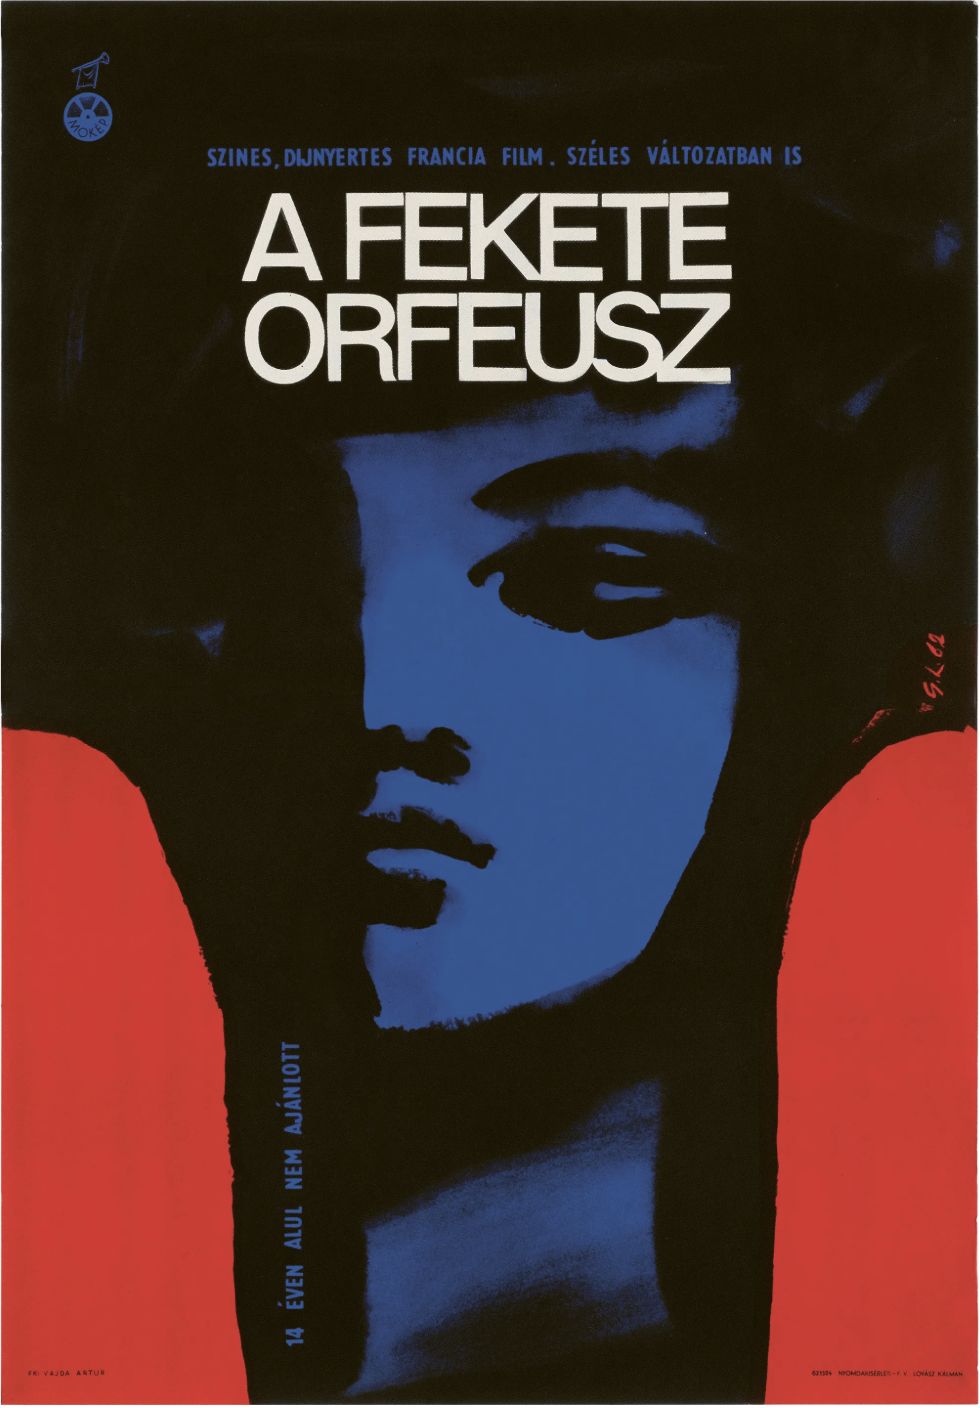 french new wave cinema posters